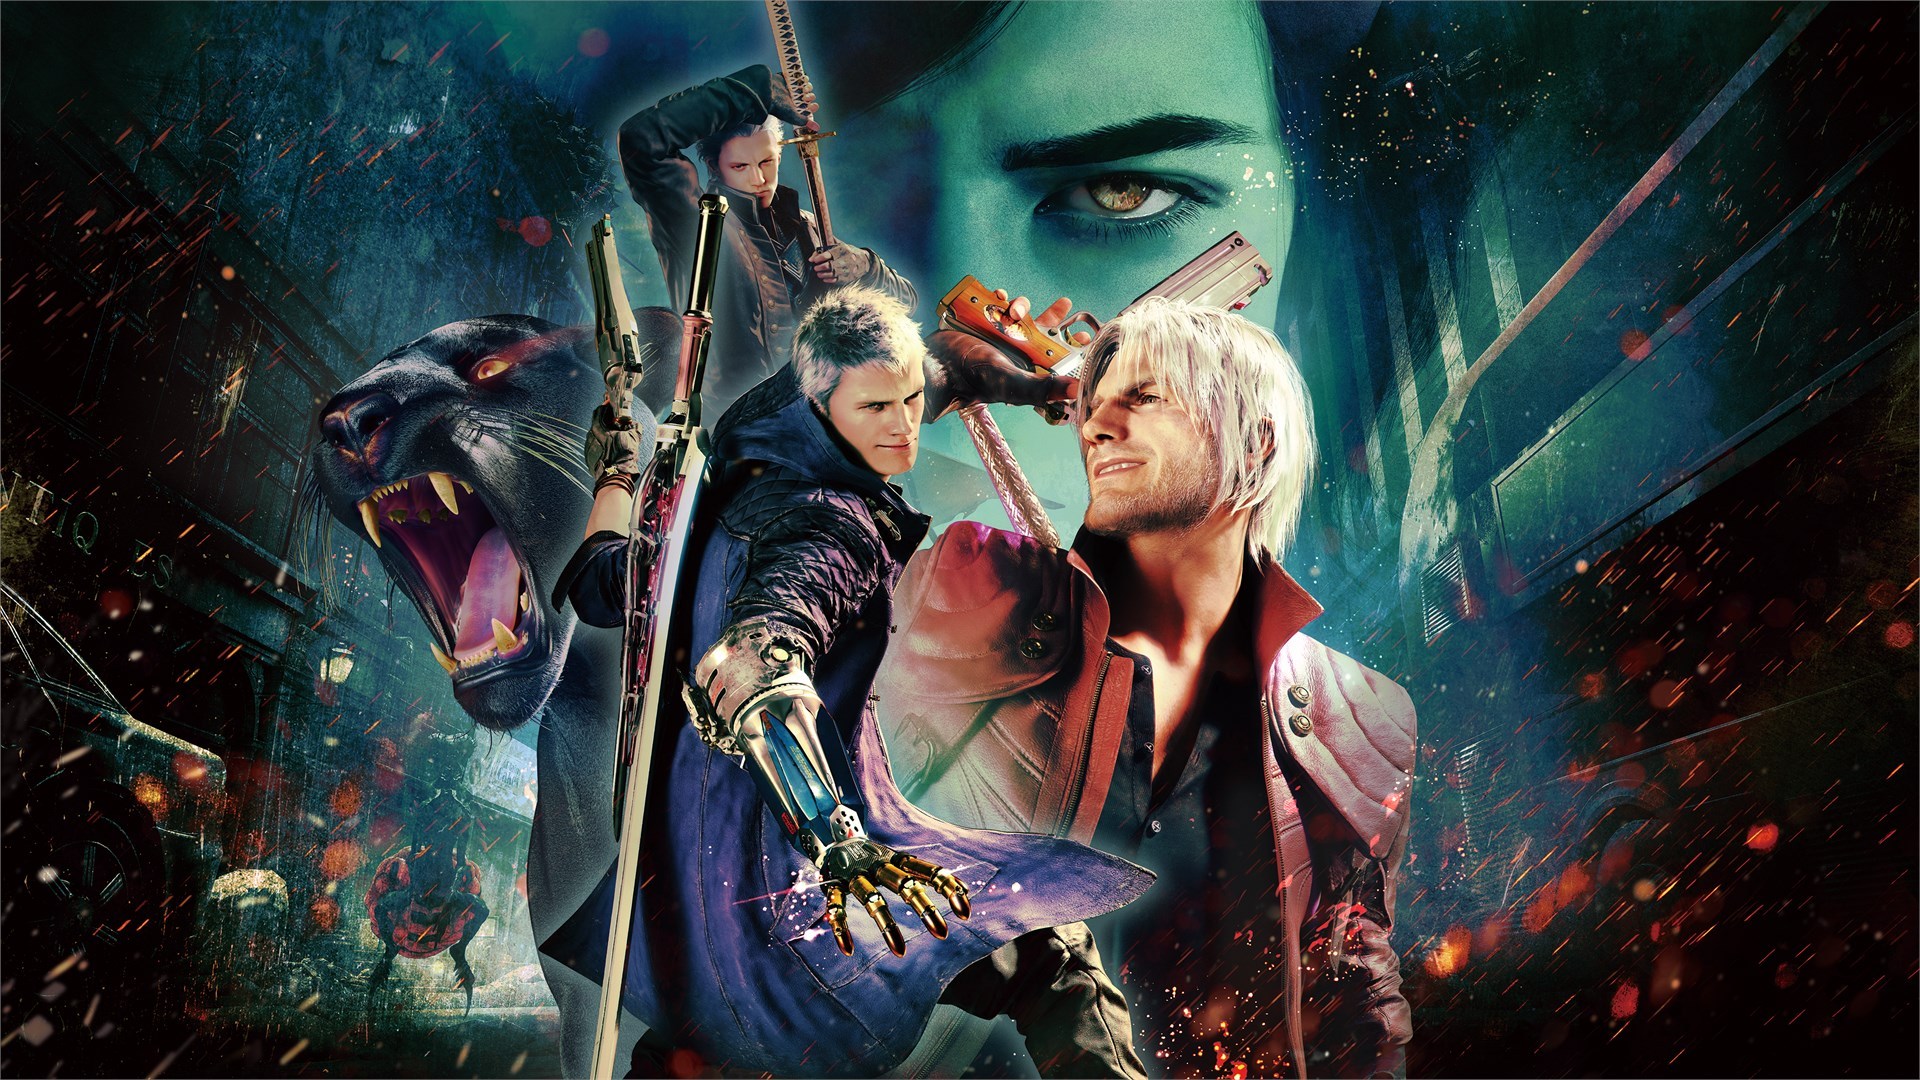 DmC: Devil May Cry getting playable Vergil DLC, watch gameplay here